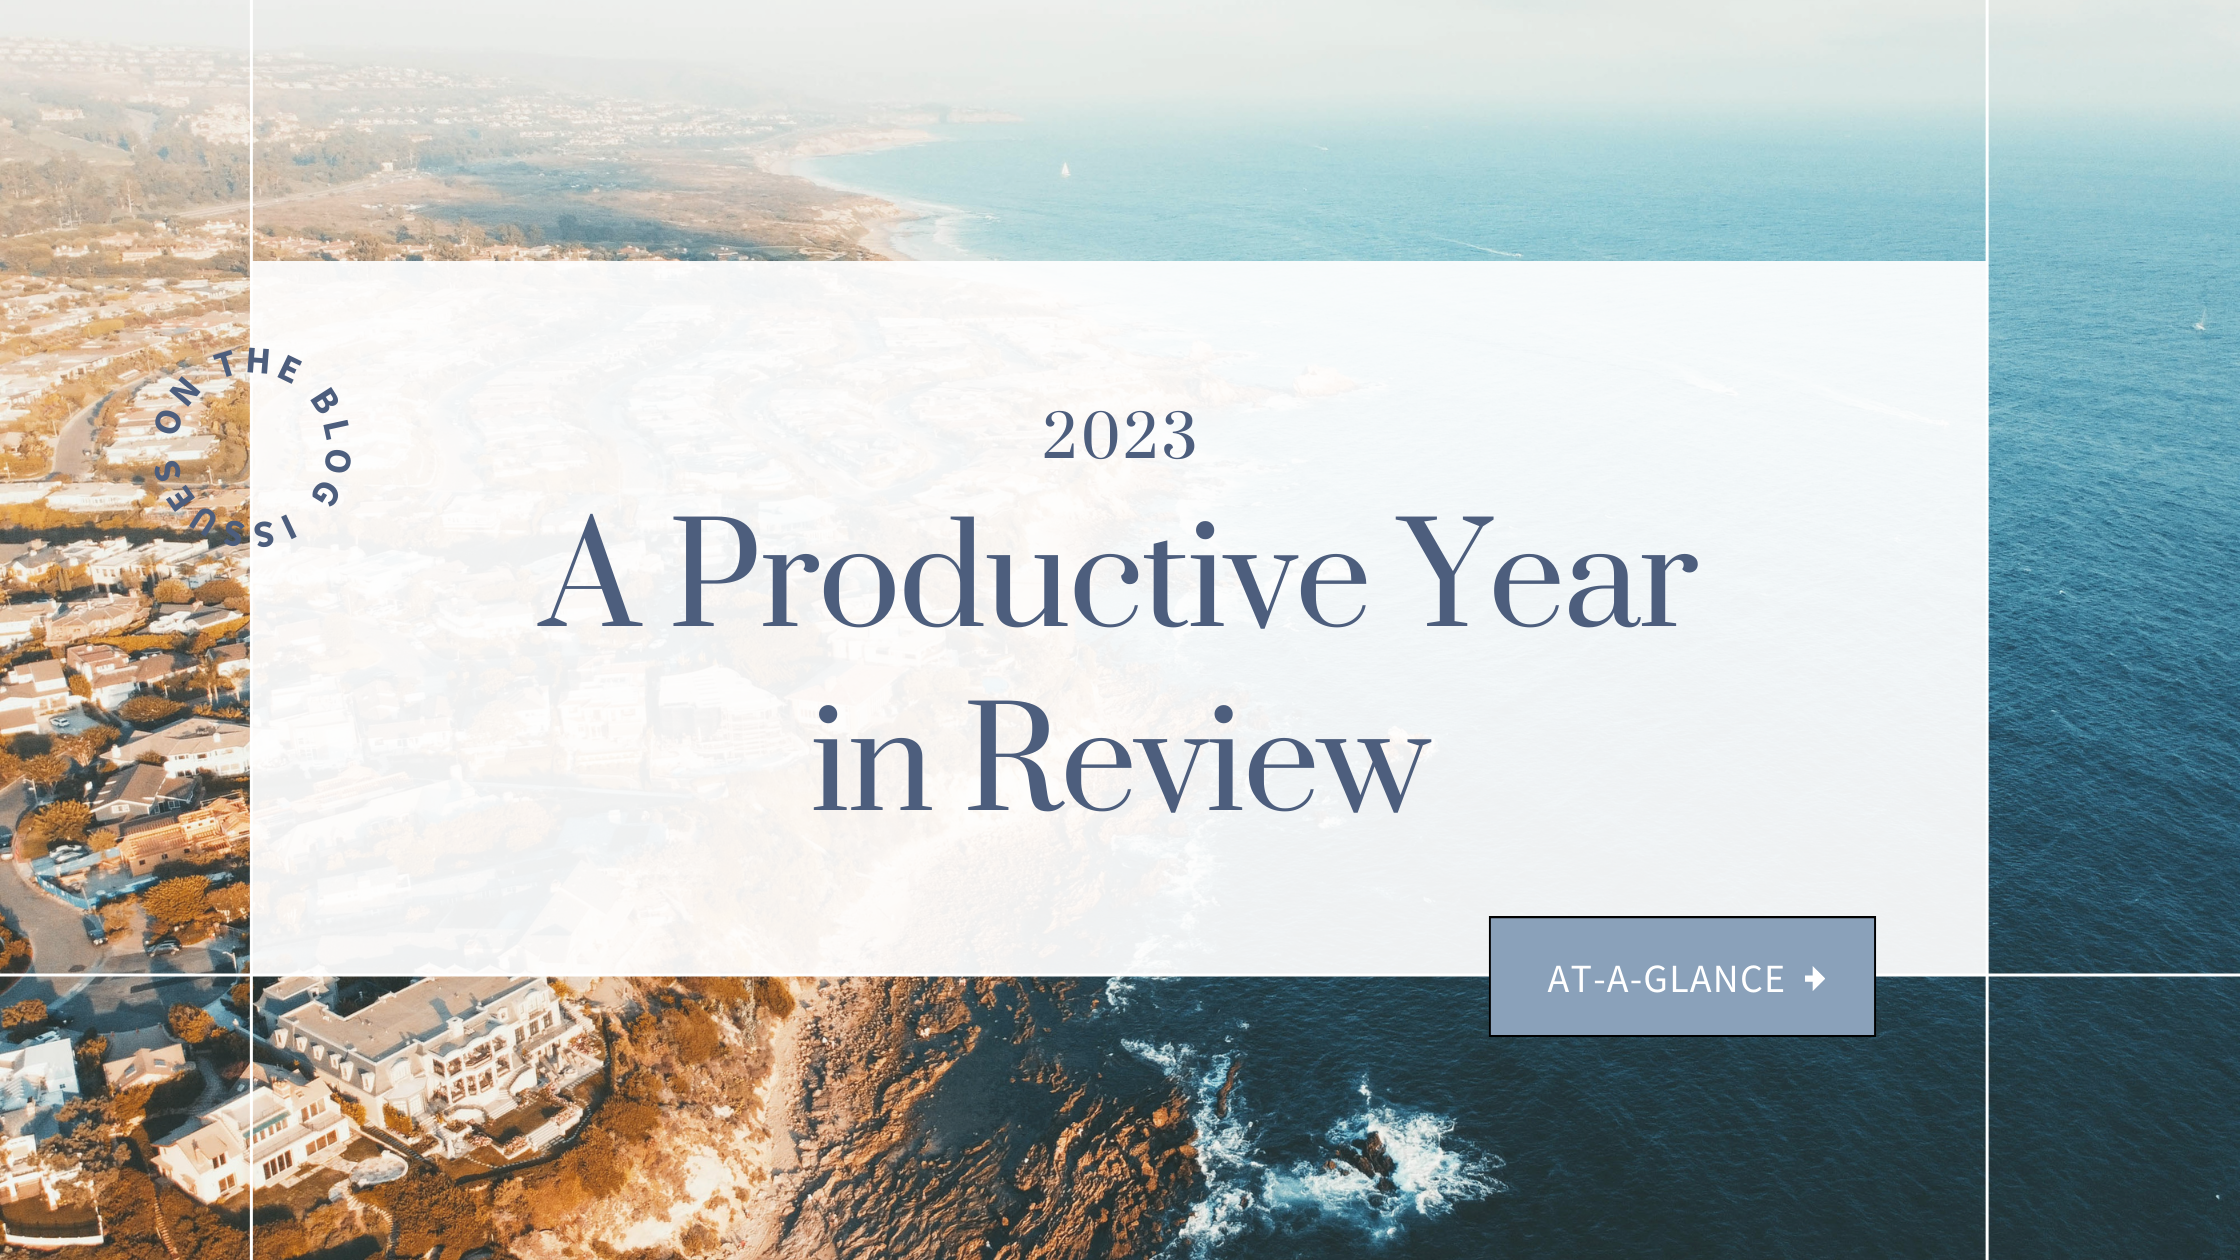 A Productive Year Review